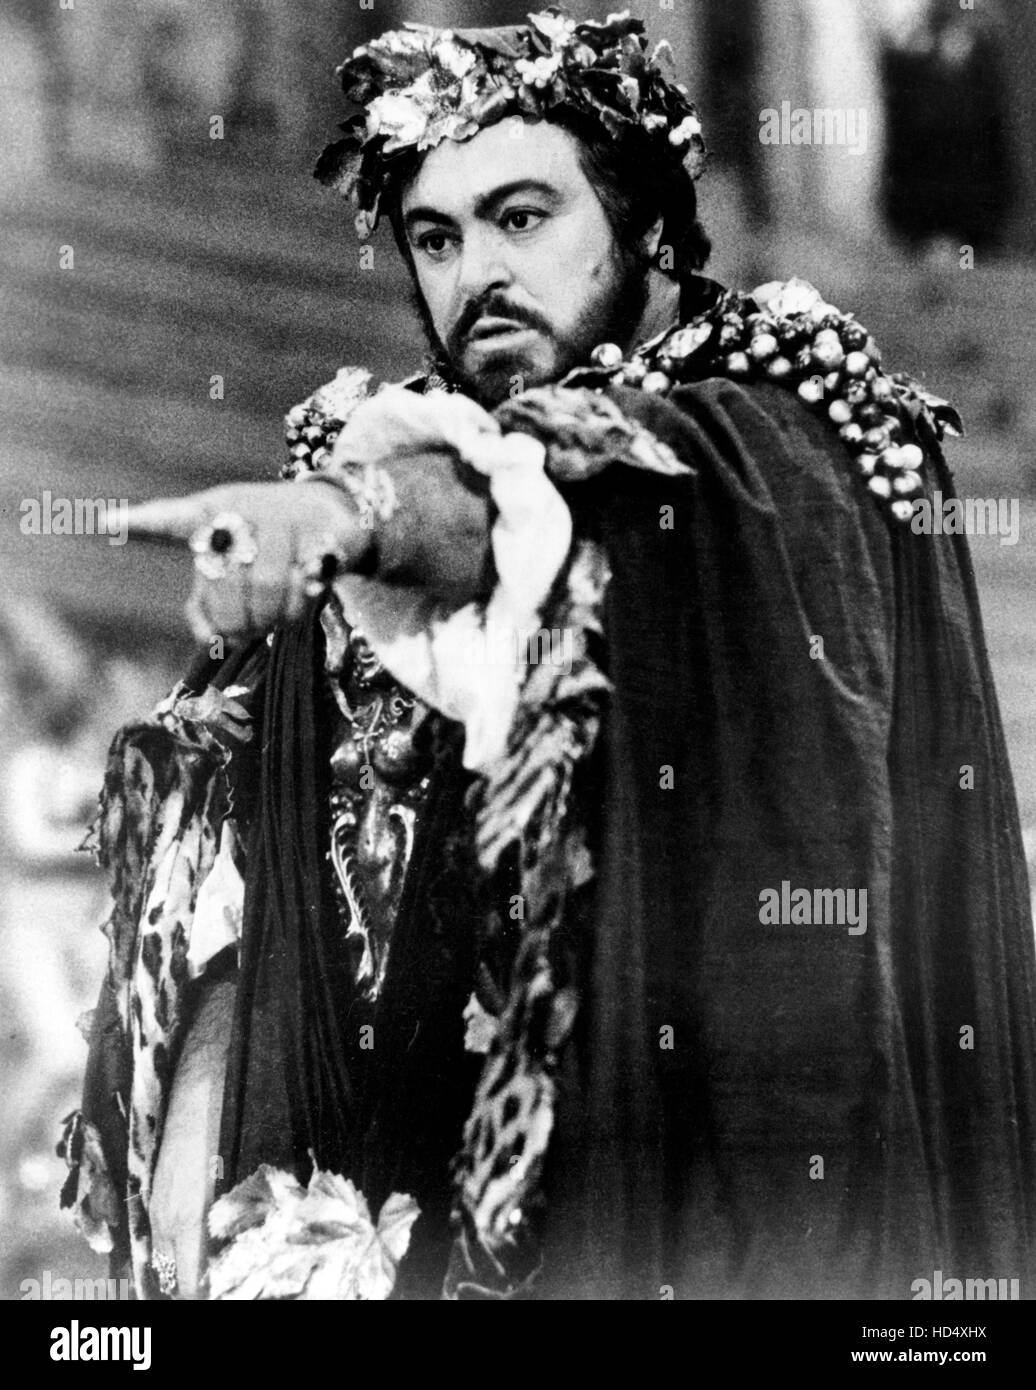 GREAT PERFORMANCES, Luciano Pavarotti as the Duke of Mantua in 'Rigoletto', March 15, 1985. Shot in Northern Italy. 1971- Stock Photo